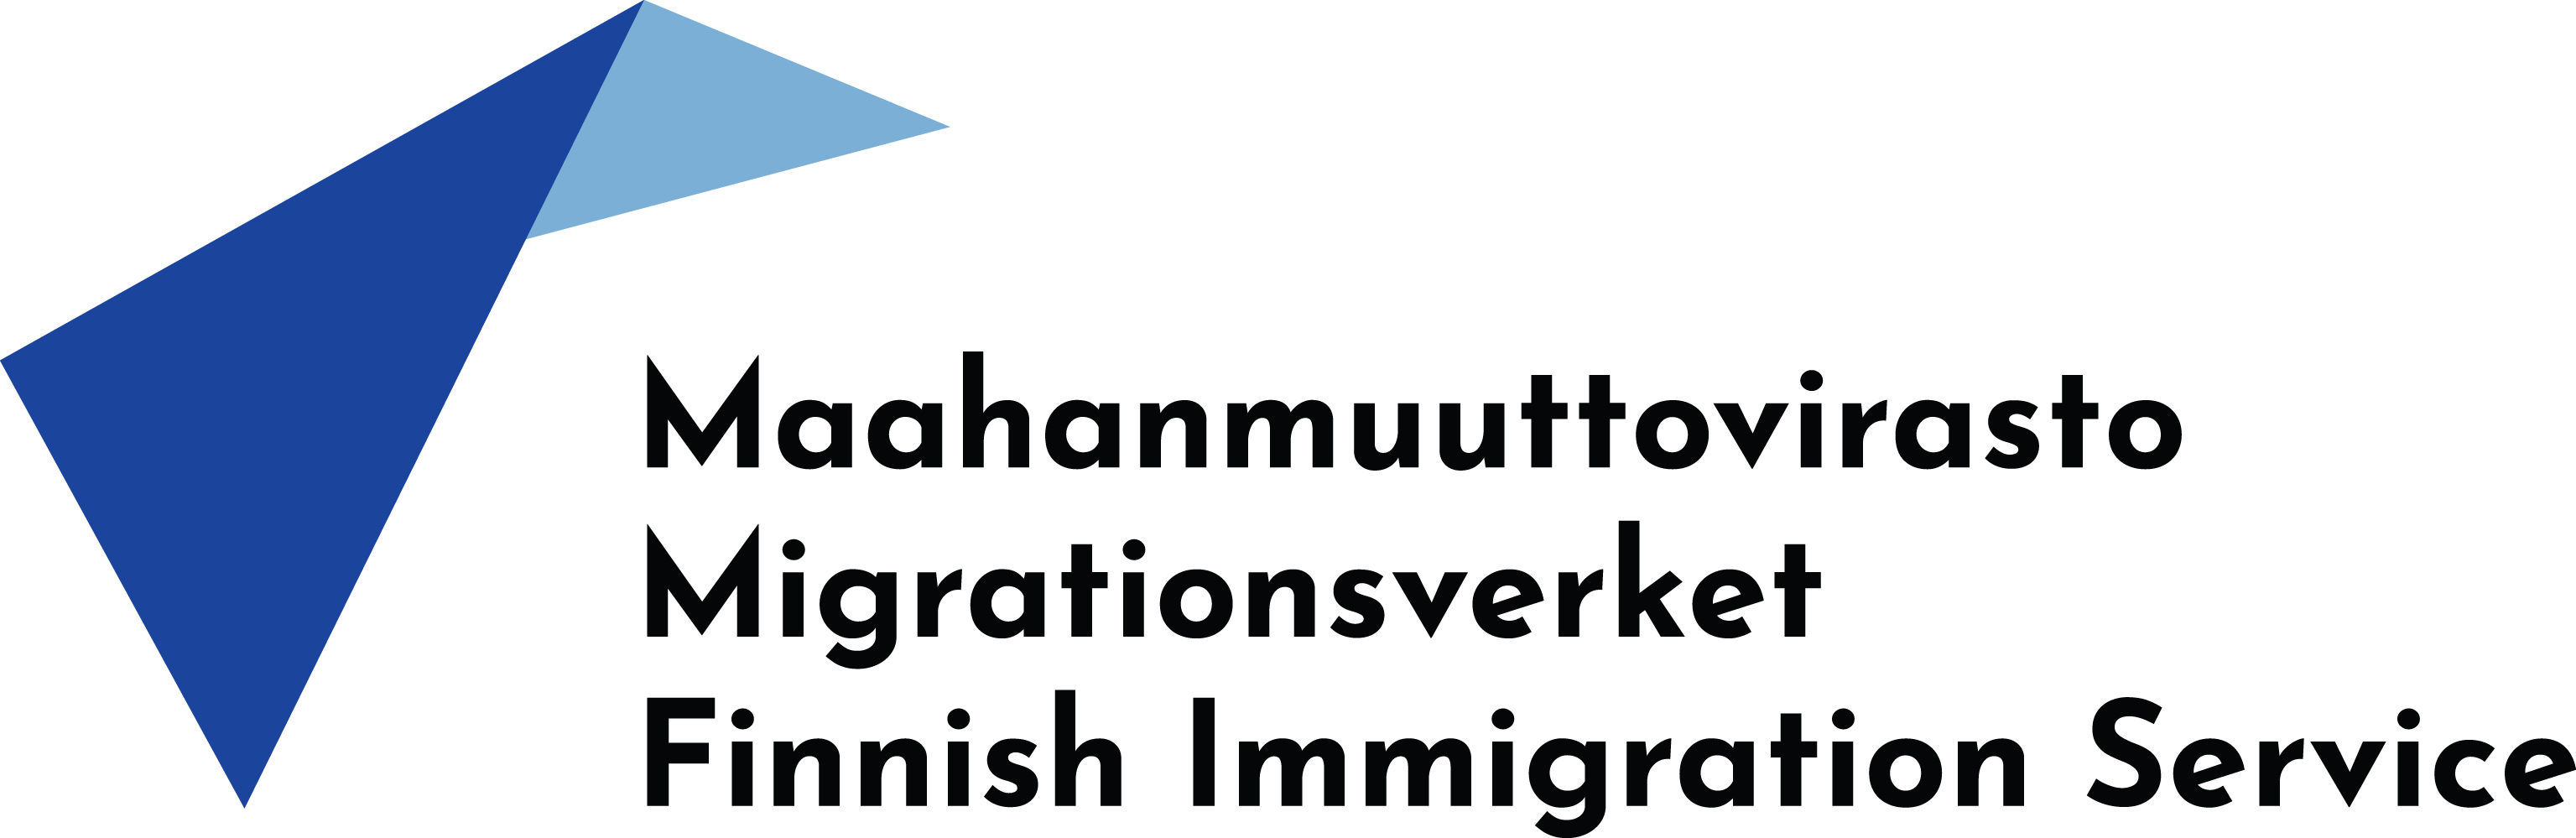 Logo of the Finnish Immigration Service.